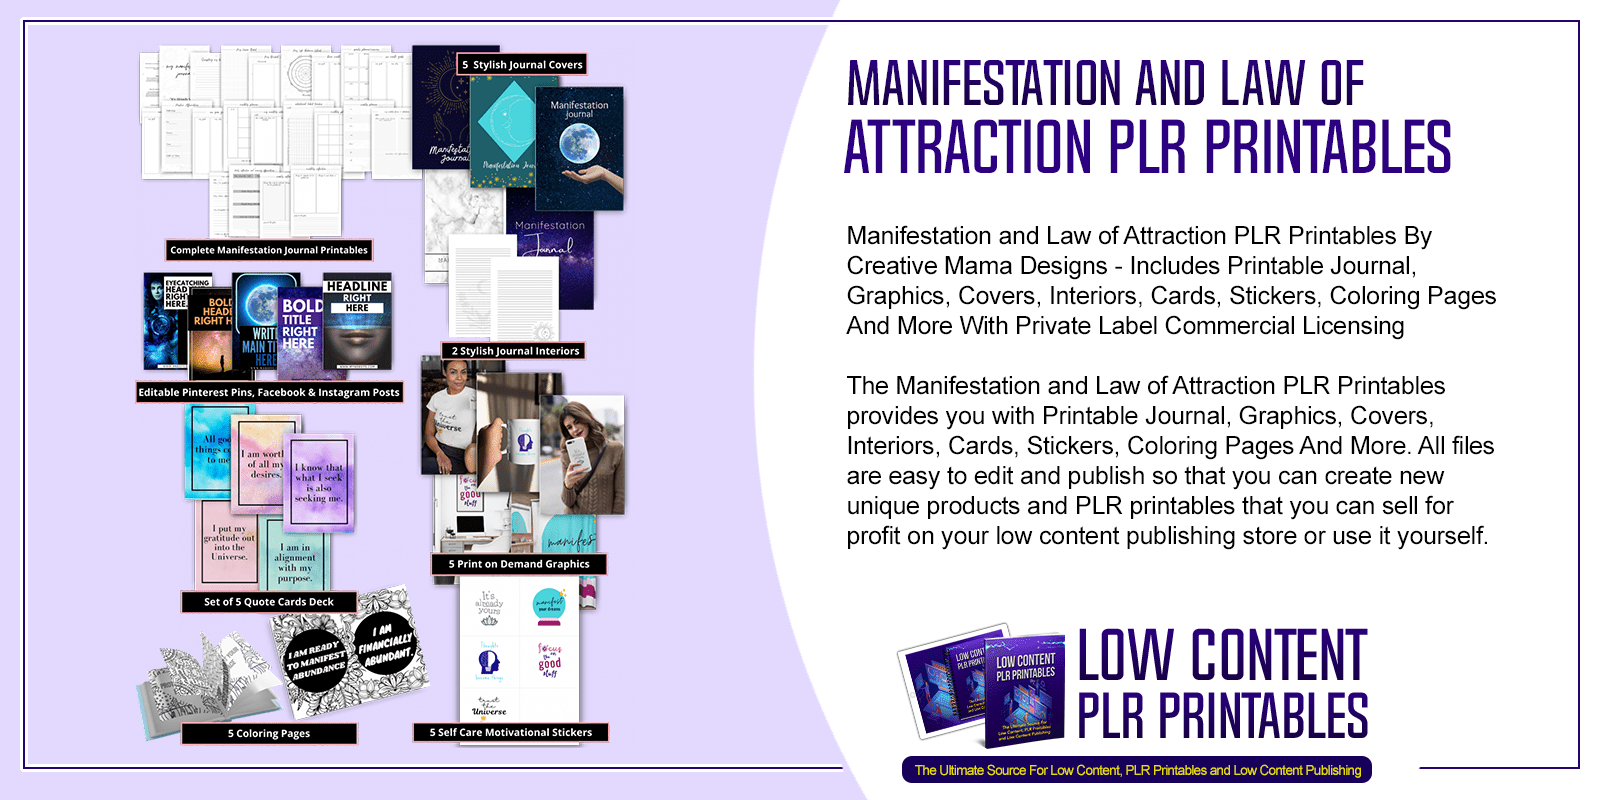 Manifestation and Law of Attraction PLR Printables